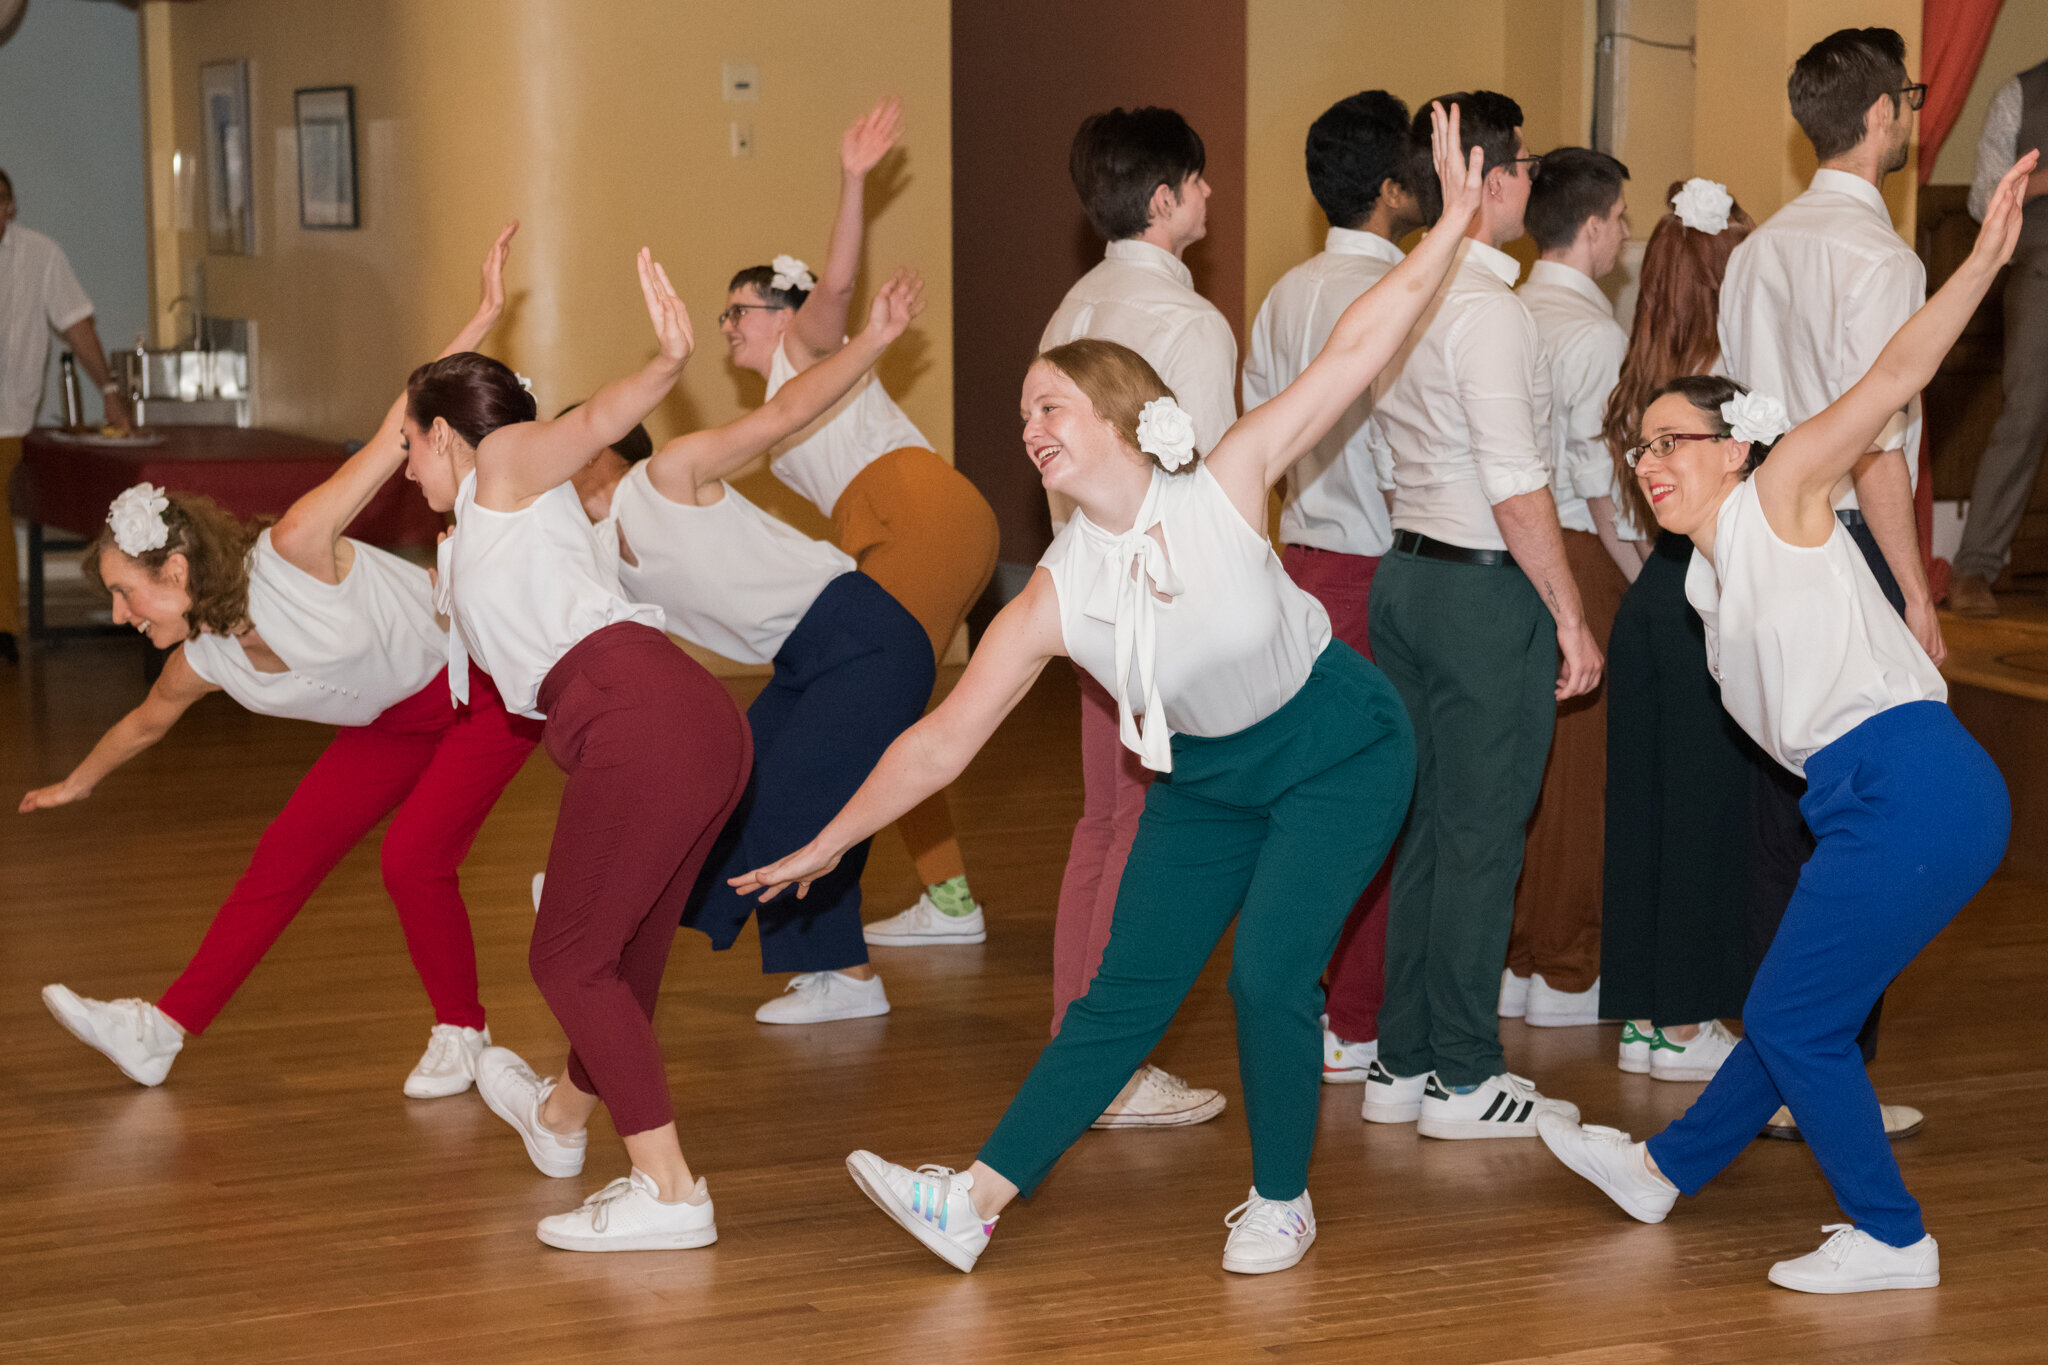 You have one more week to dust off your dance shoes! The next season of the Boulder Swing Dance performance teams begins with auditions on Monday, March 18. These three-month sessions are a great way to improve your dancing, make friends and just hav